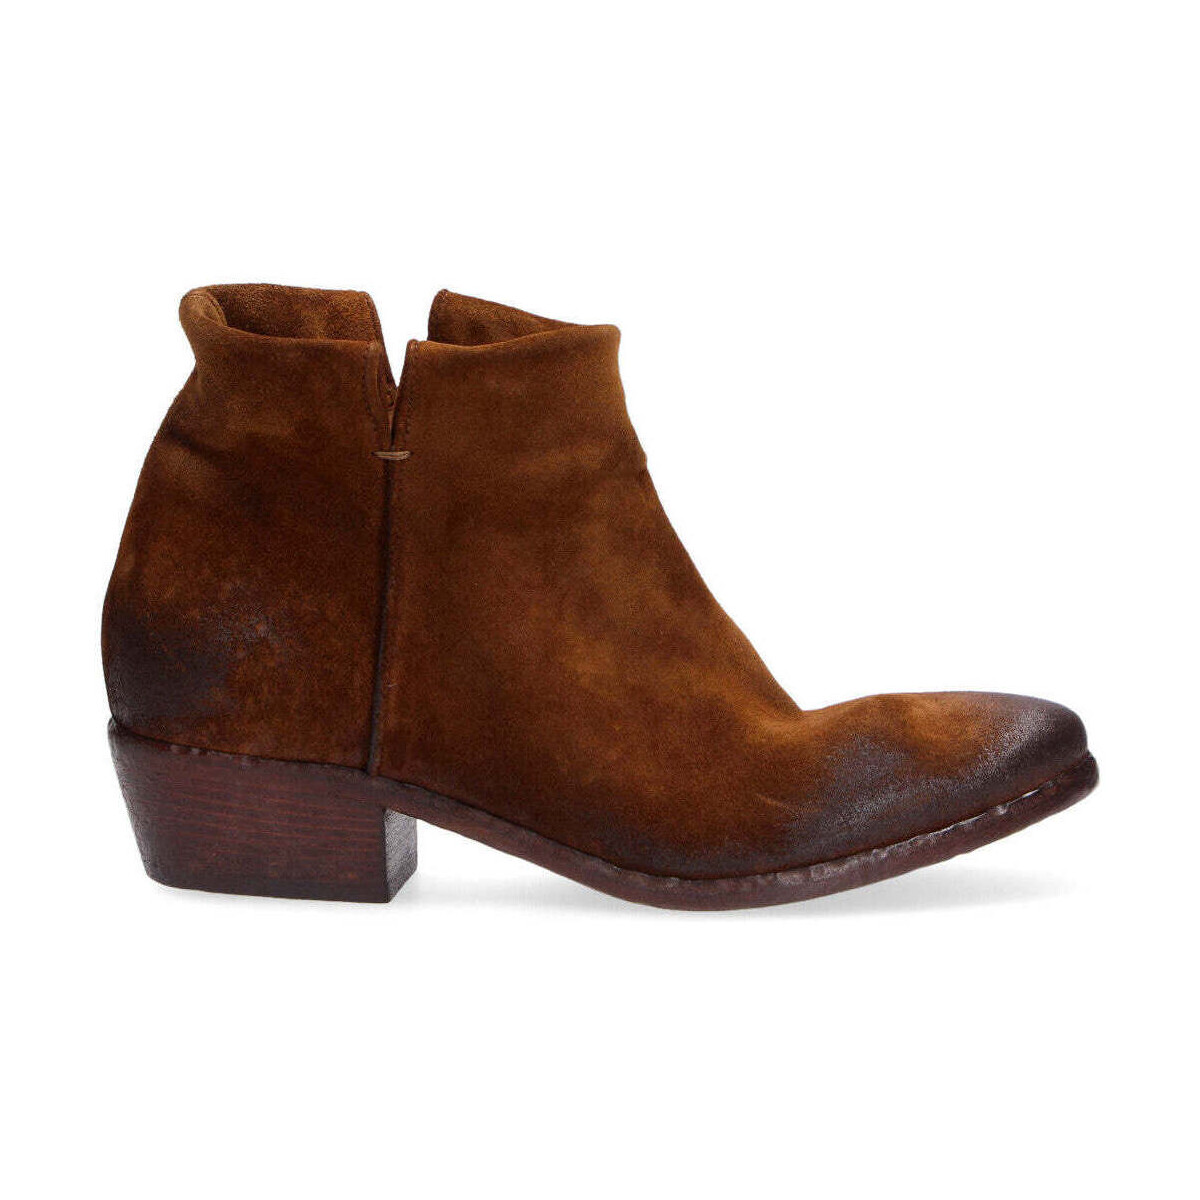 Chaussures Femme Low boots Strategia  Marron